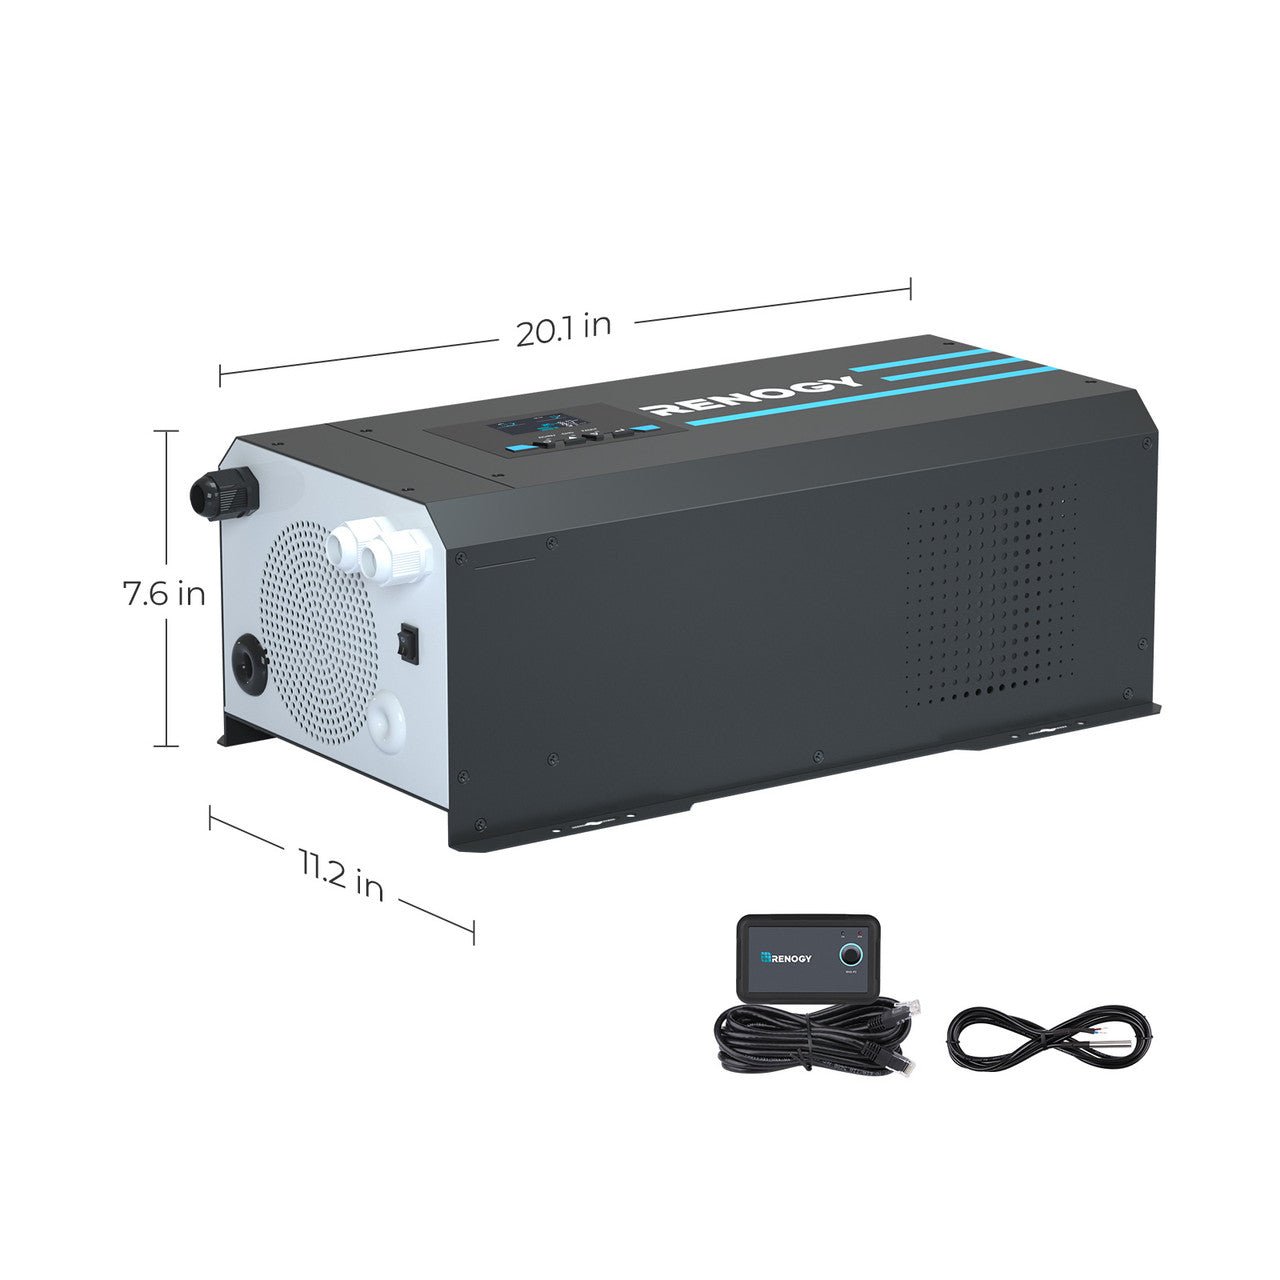 Renogy 3000W 12V Pure Sine Wave Inverter Charger w/ LCD Display - Solar Generators and Power Stations Plus